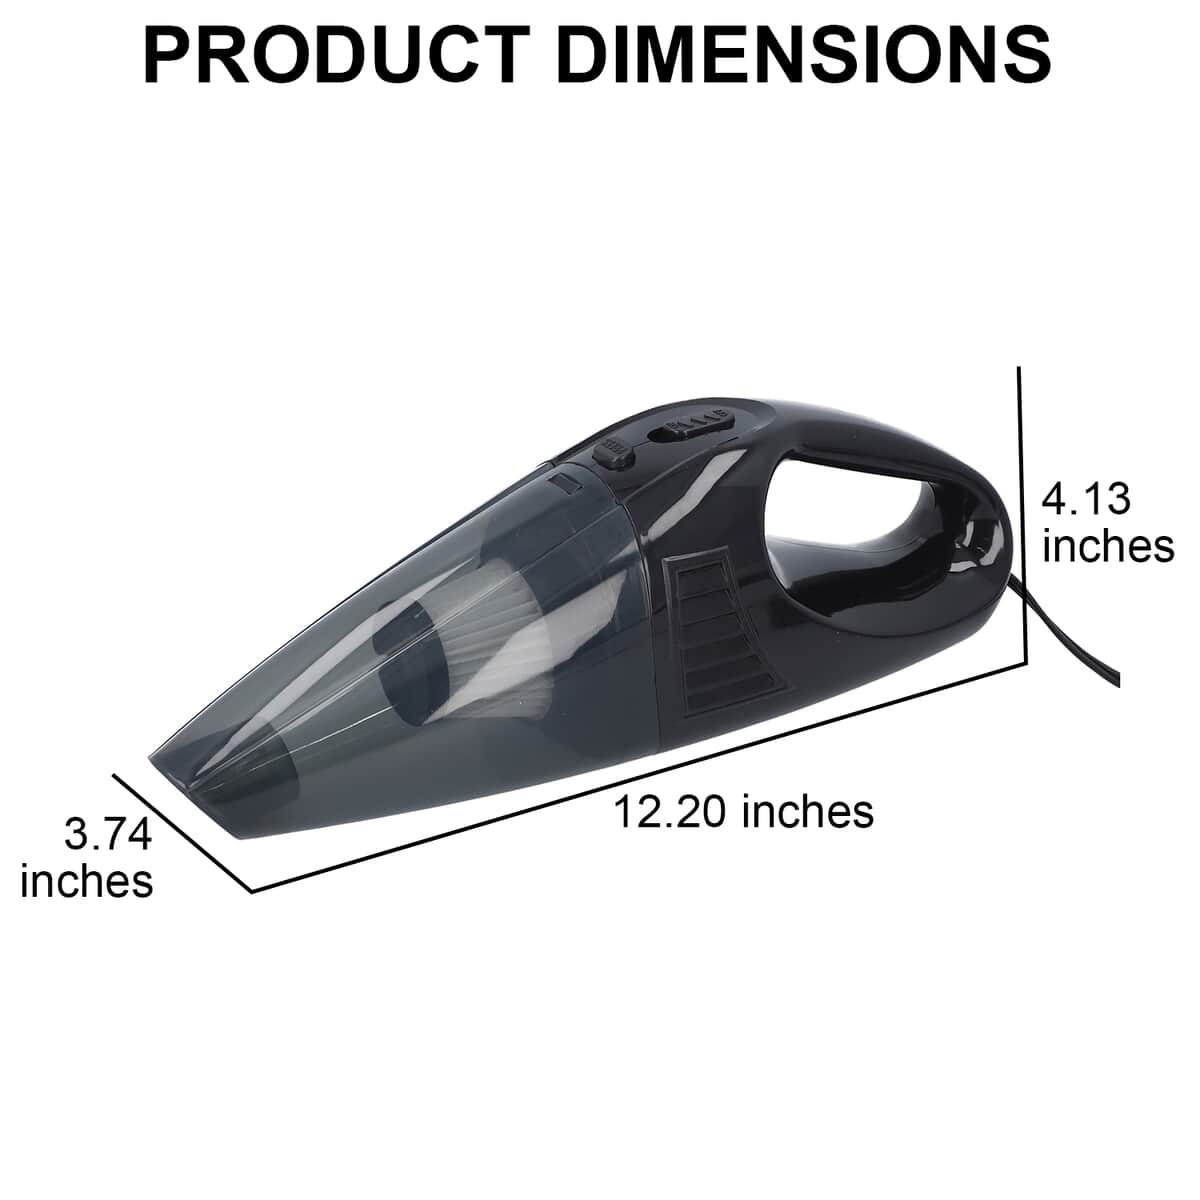 HOMESMART Black Car Vacuum Cleaner with Accessories (12.2"x3.74"x4.13") (Power 65W) image number 3